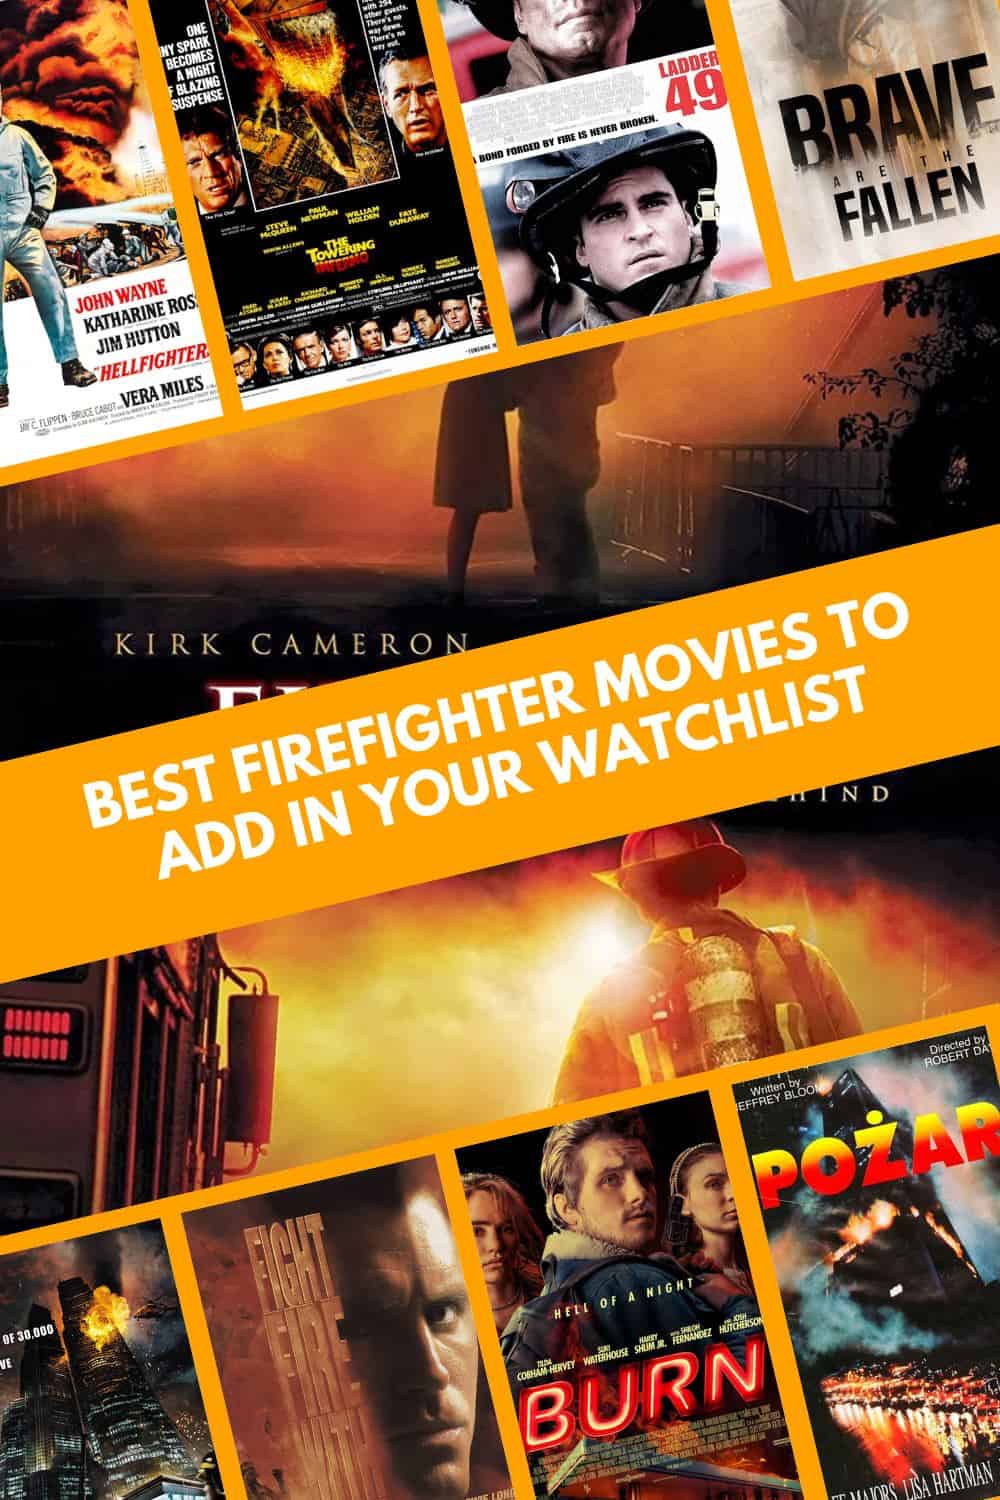 Firefighter Movies to Add in Your Watchlist